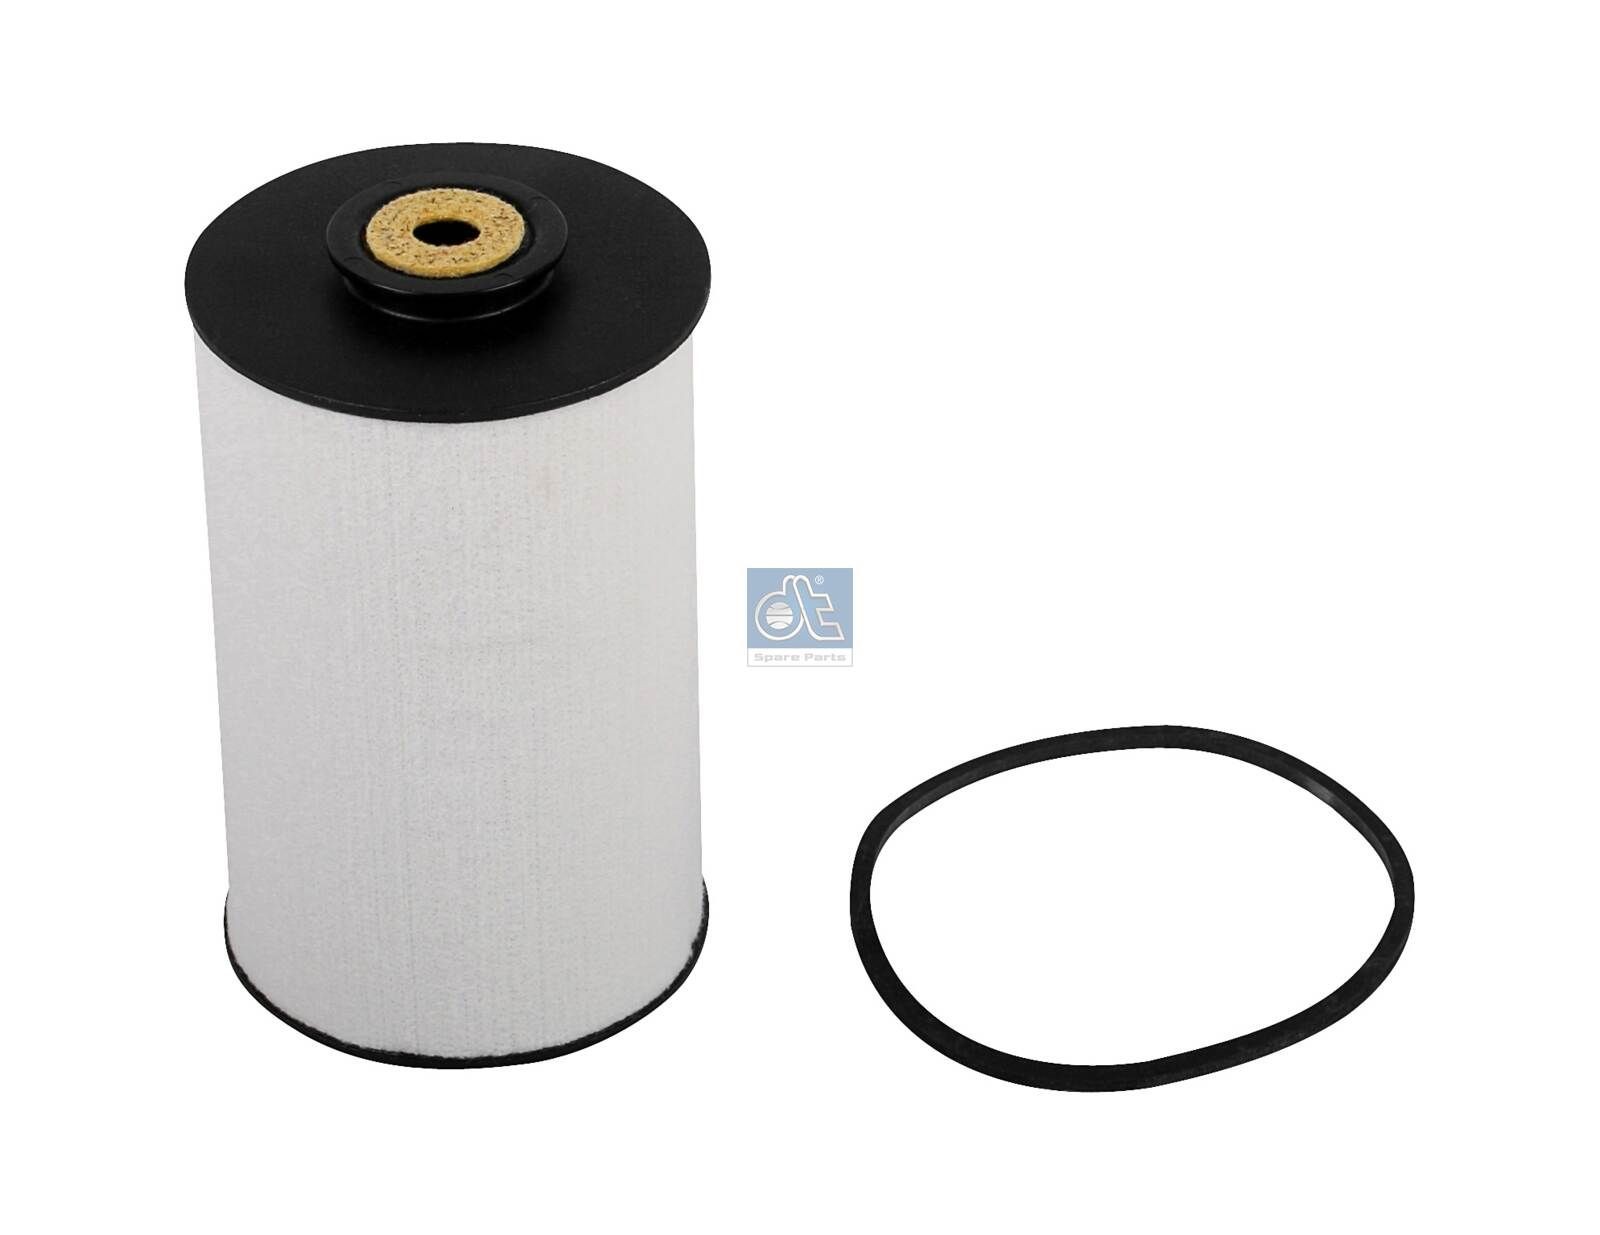 BFU 900 x DT Spare Parts 4.61531 Fuel filter 0118 1060